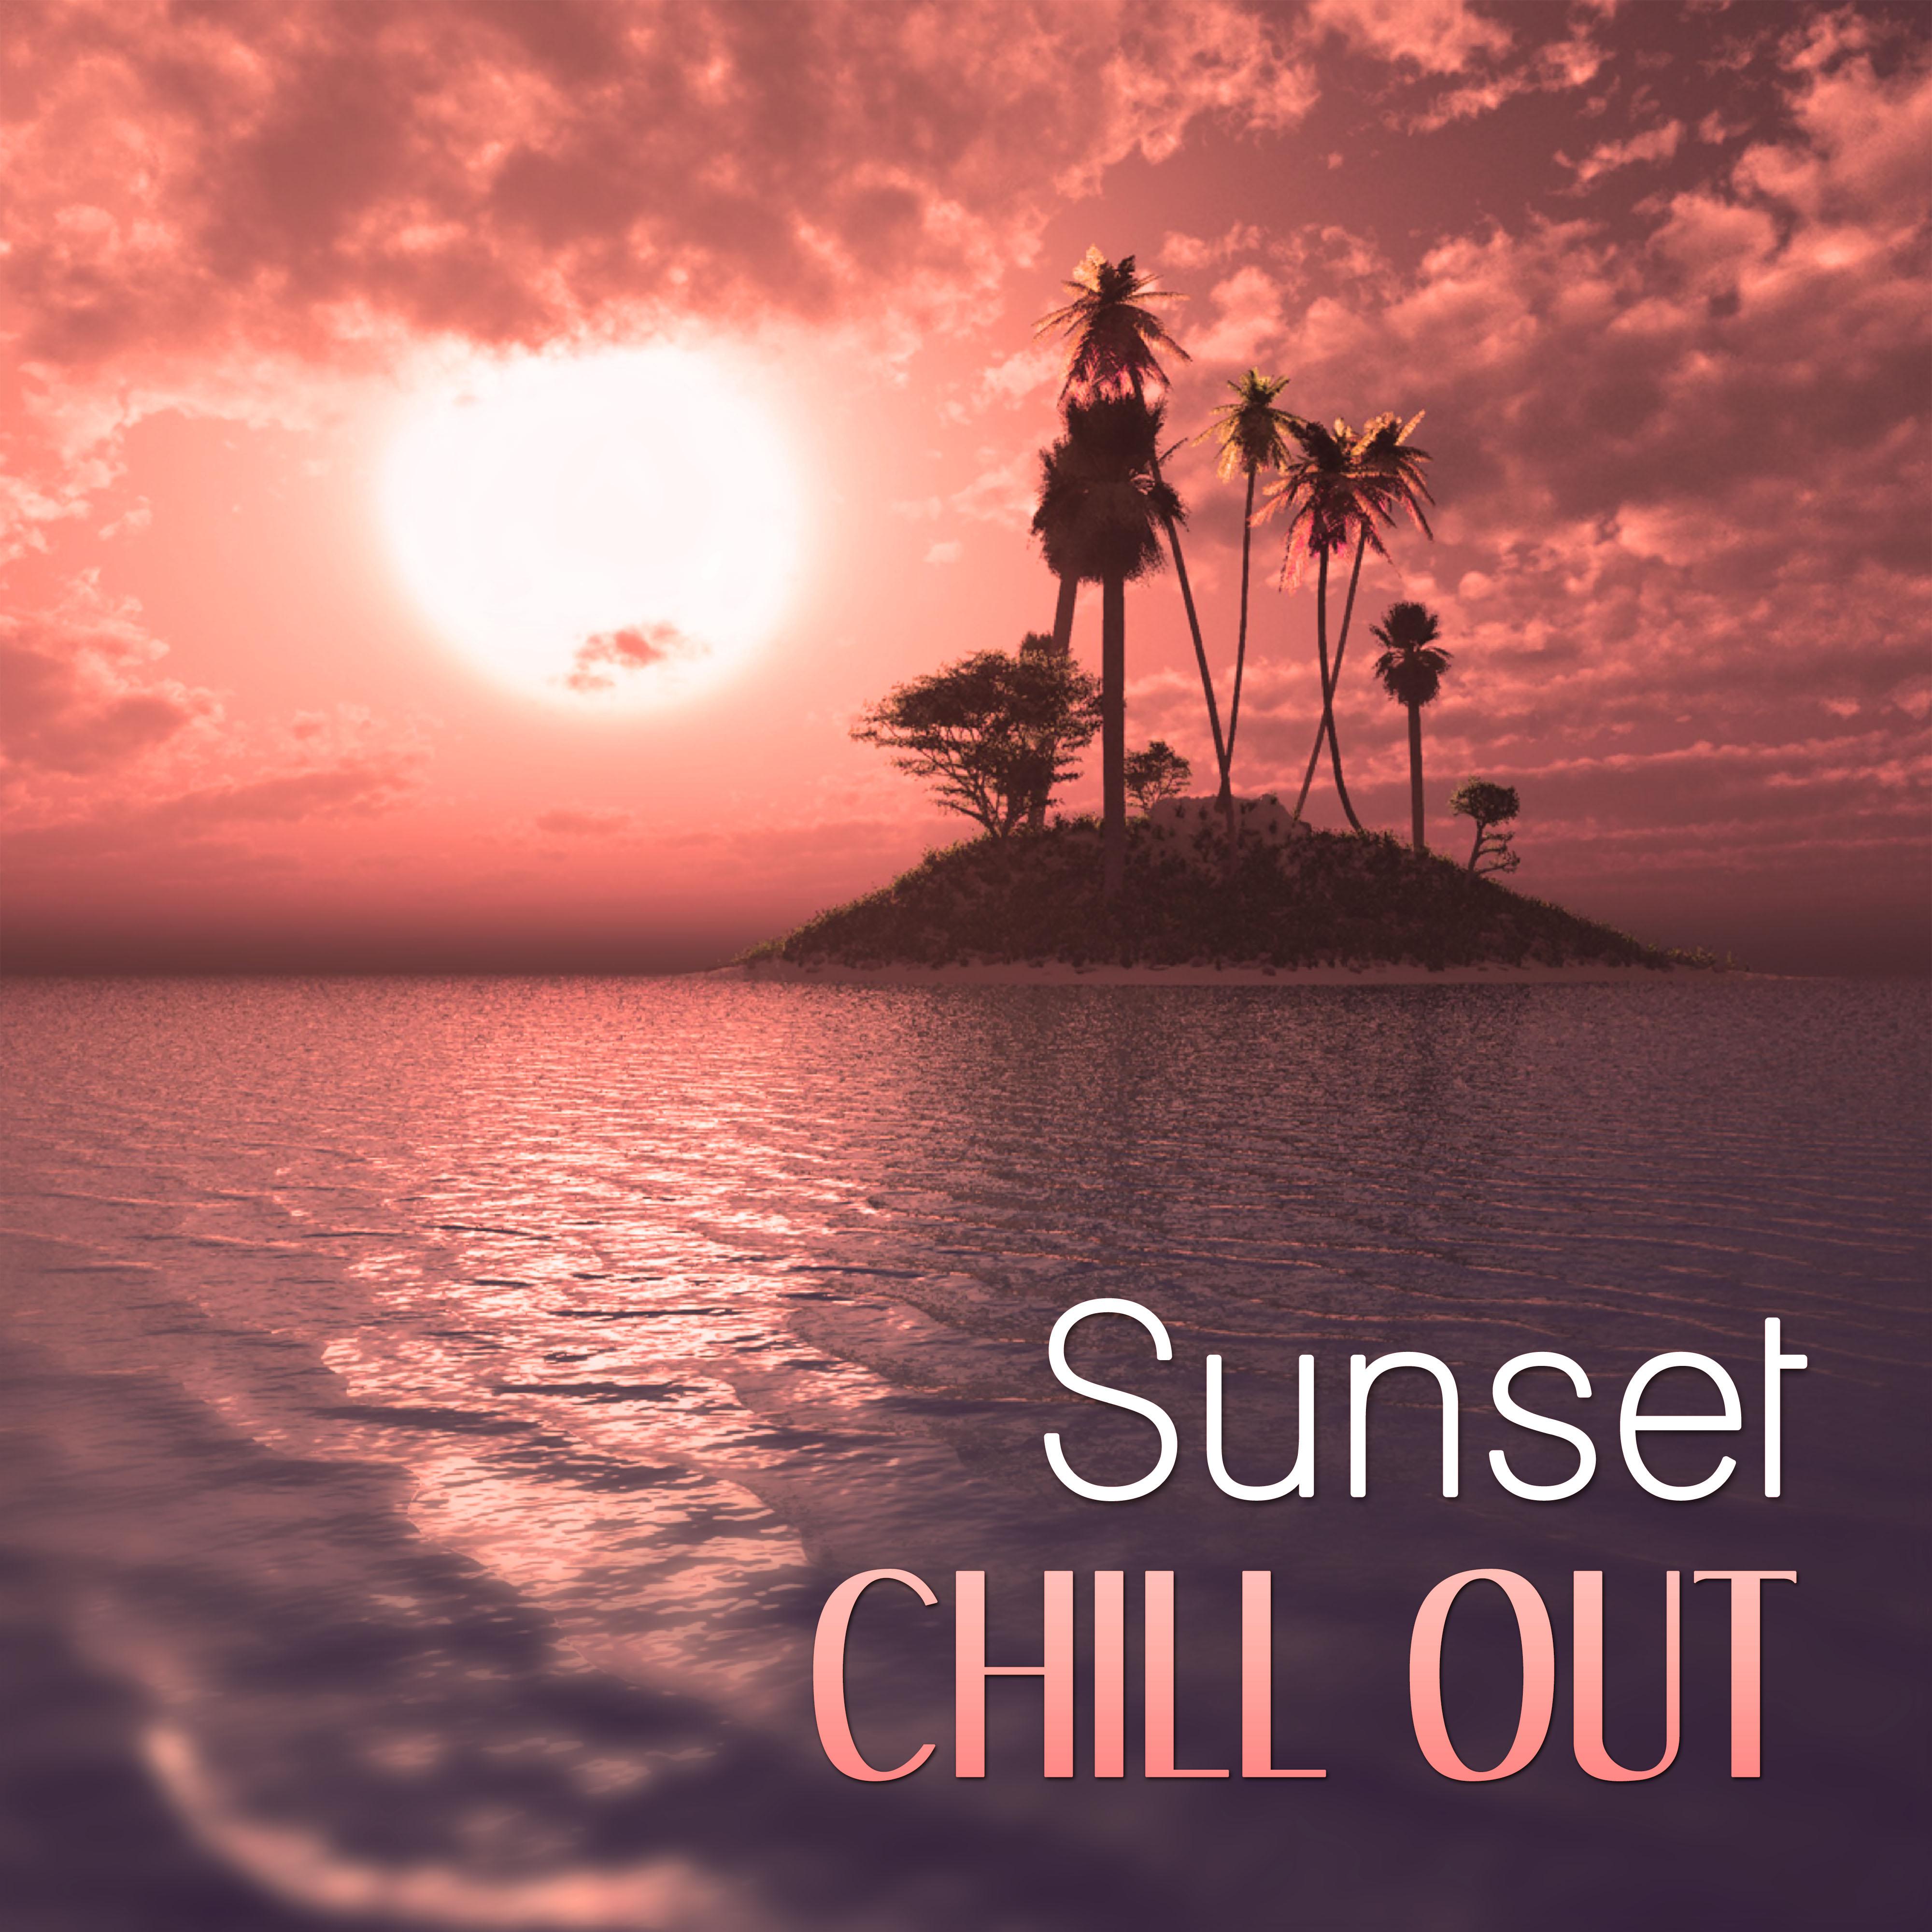 Sunset Chill Out – Chill Out Music, Best Music for Holiday, Chill on Weekend, Summer Time